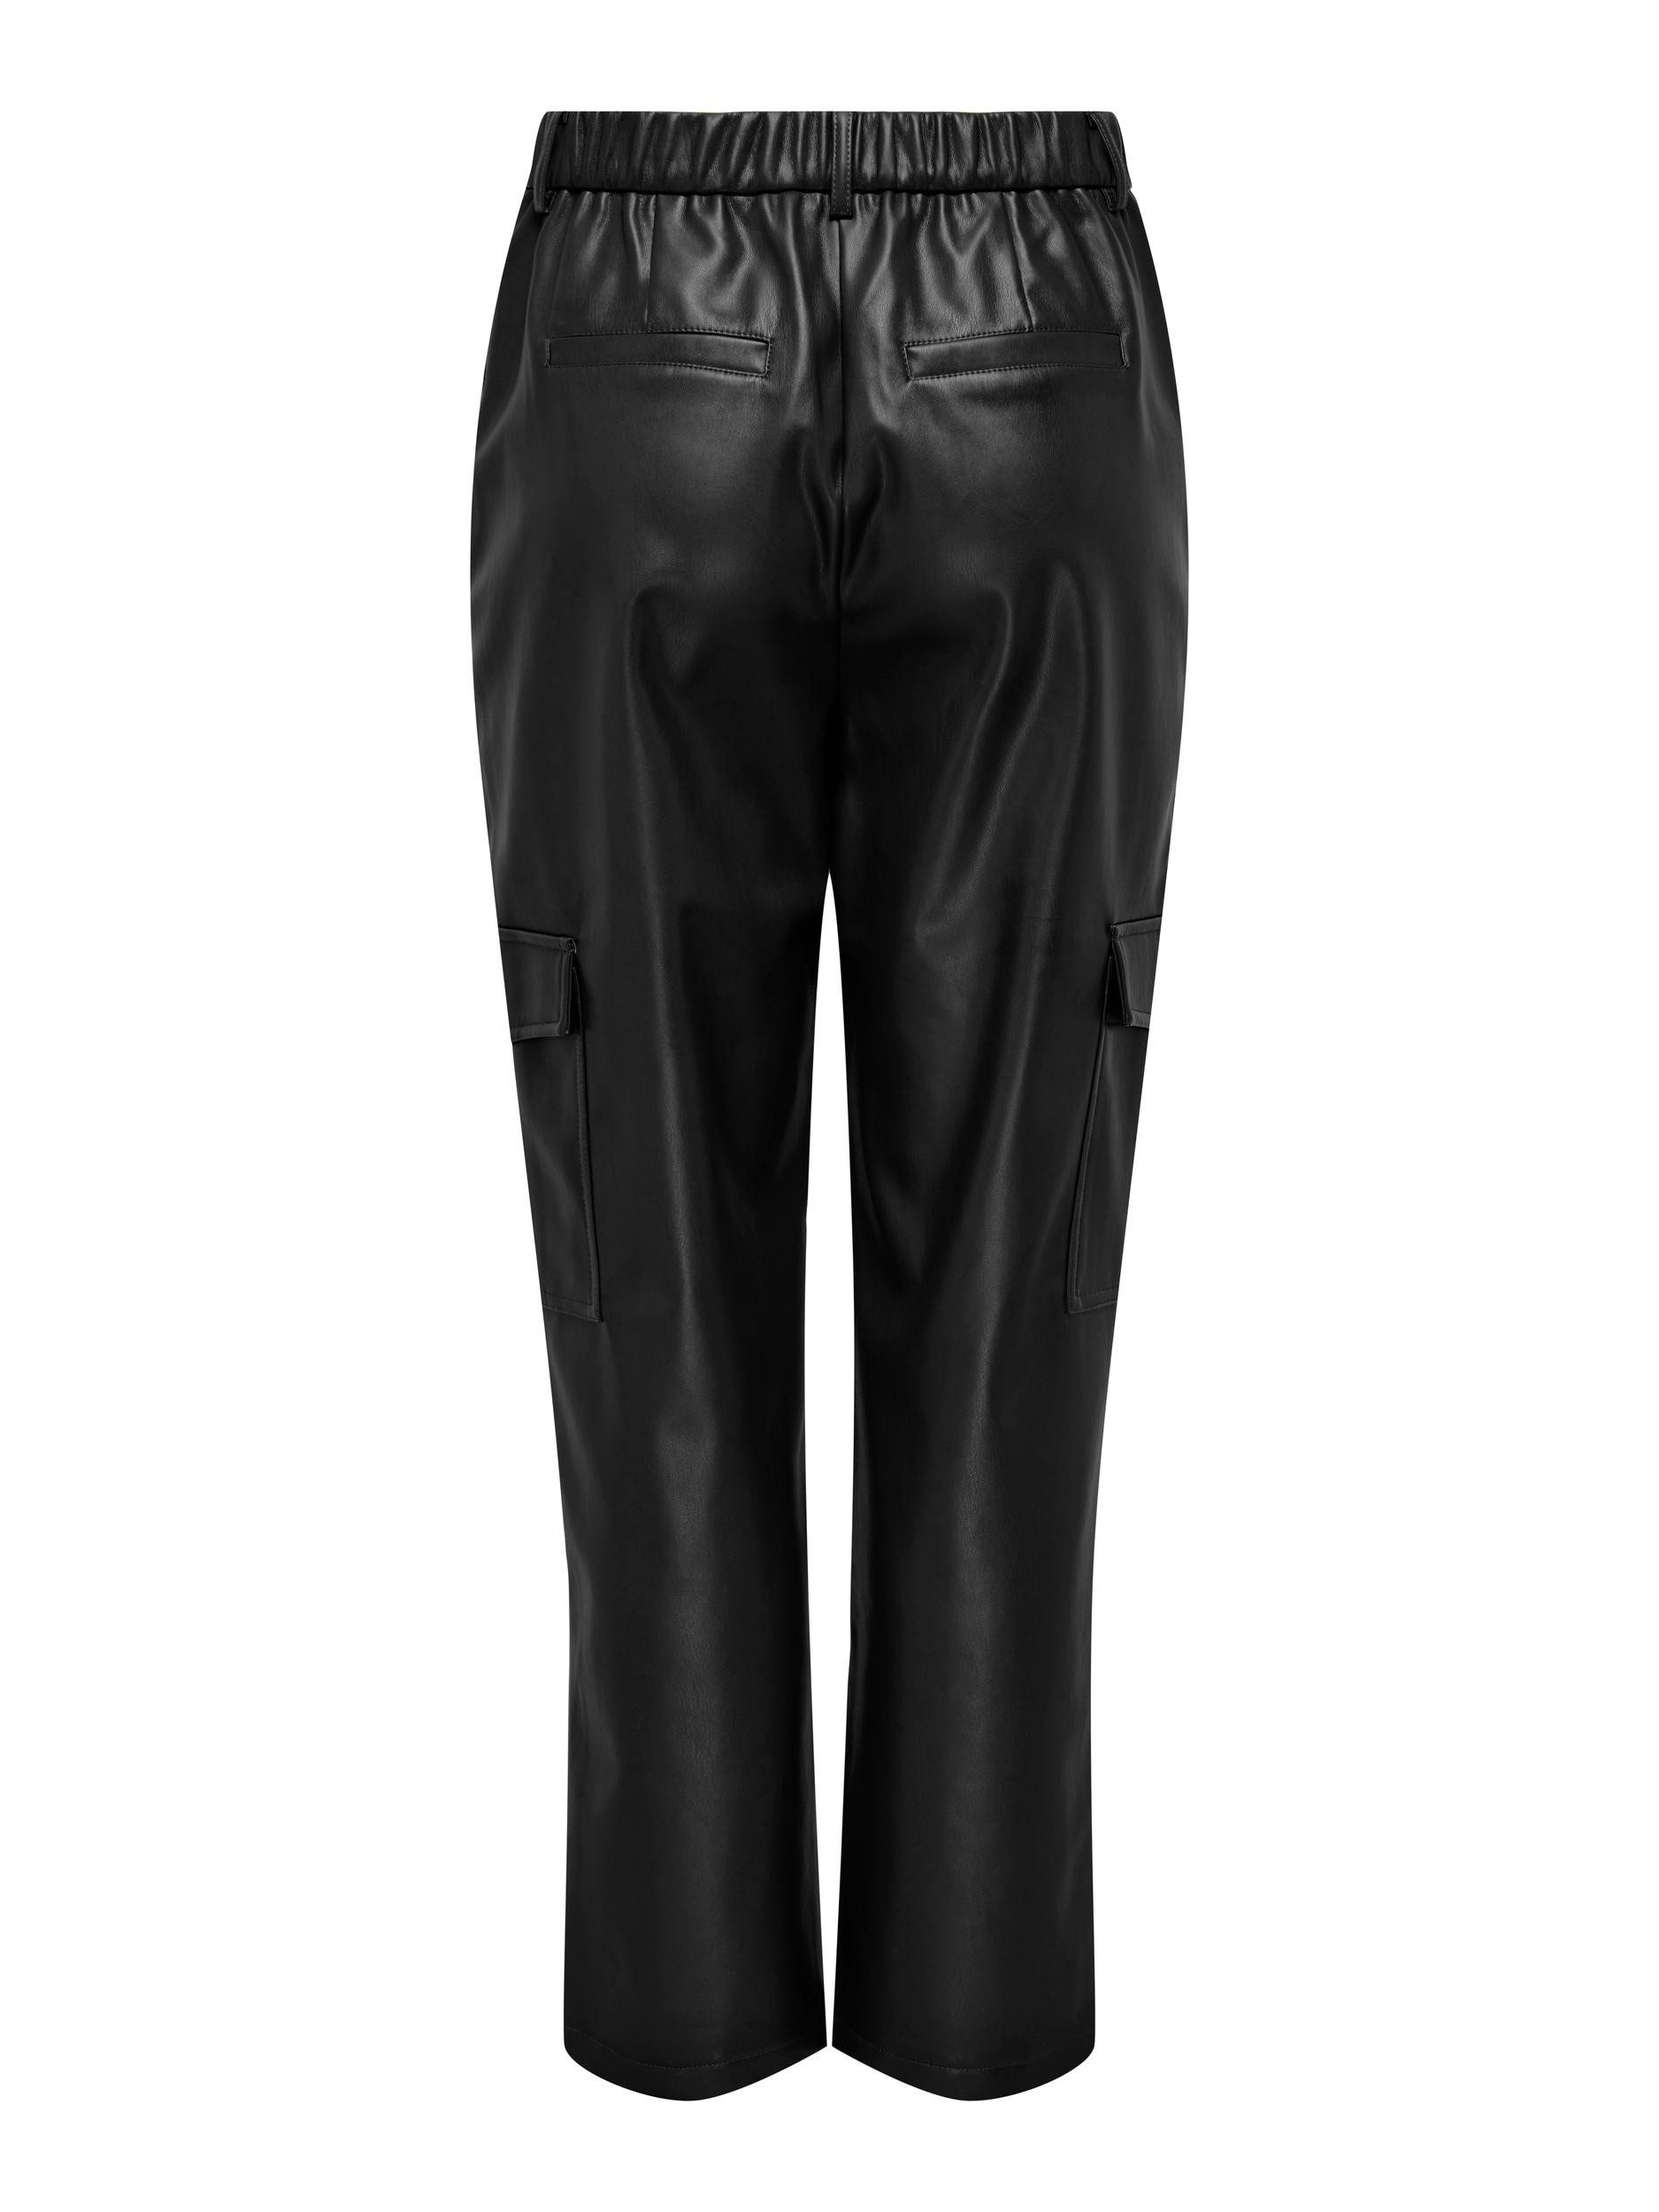 Only - Loose fit cargo trousers, Black, large image number 1